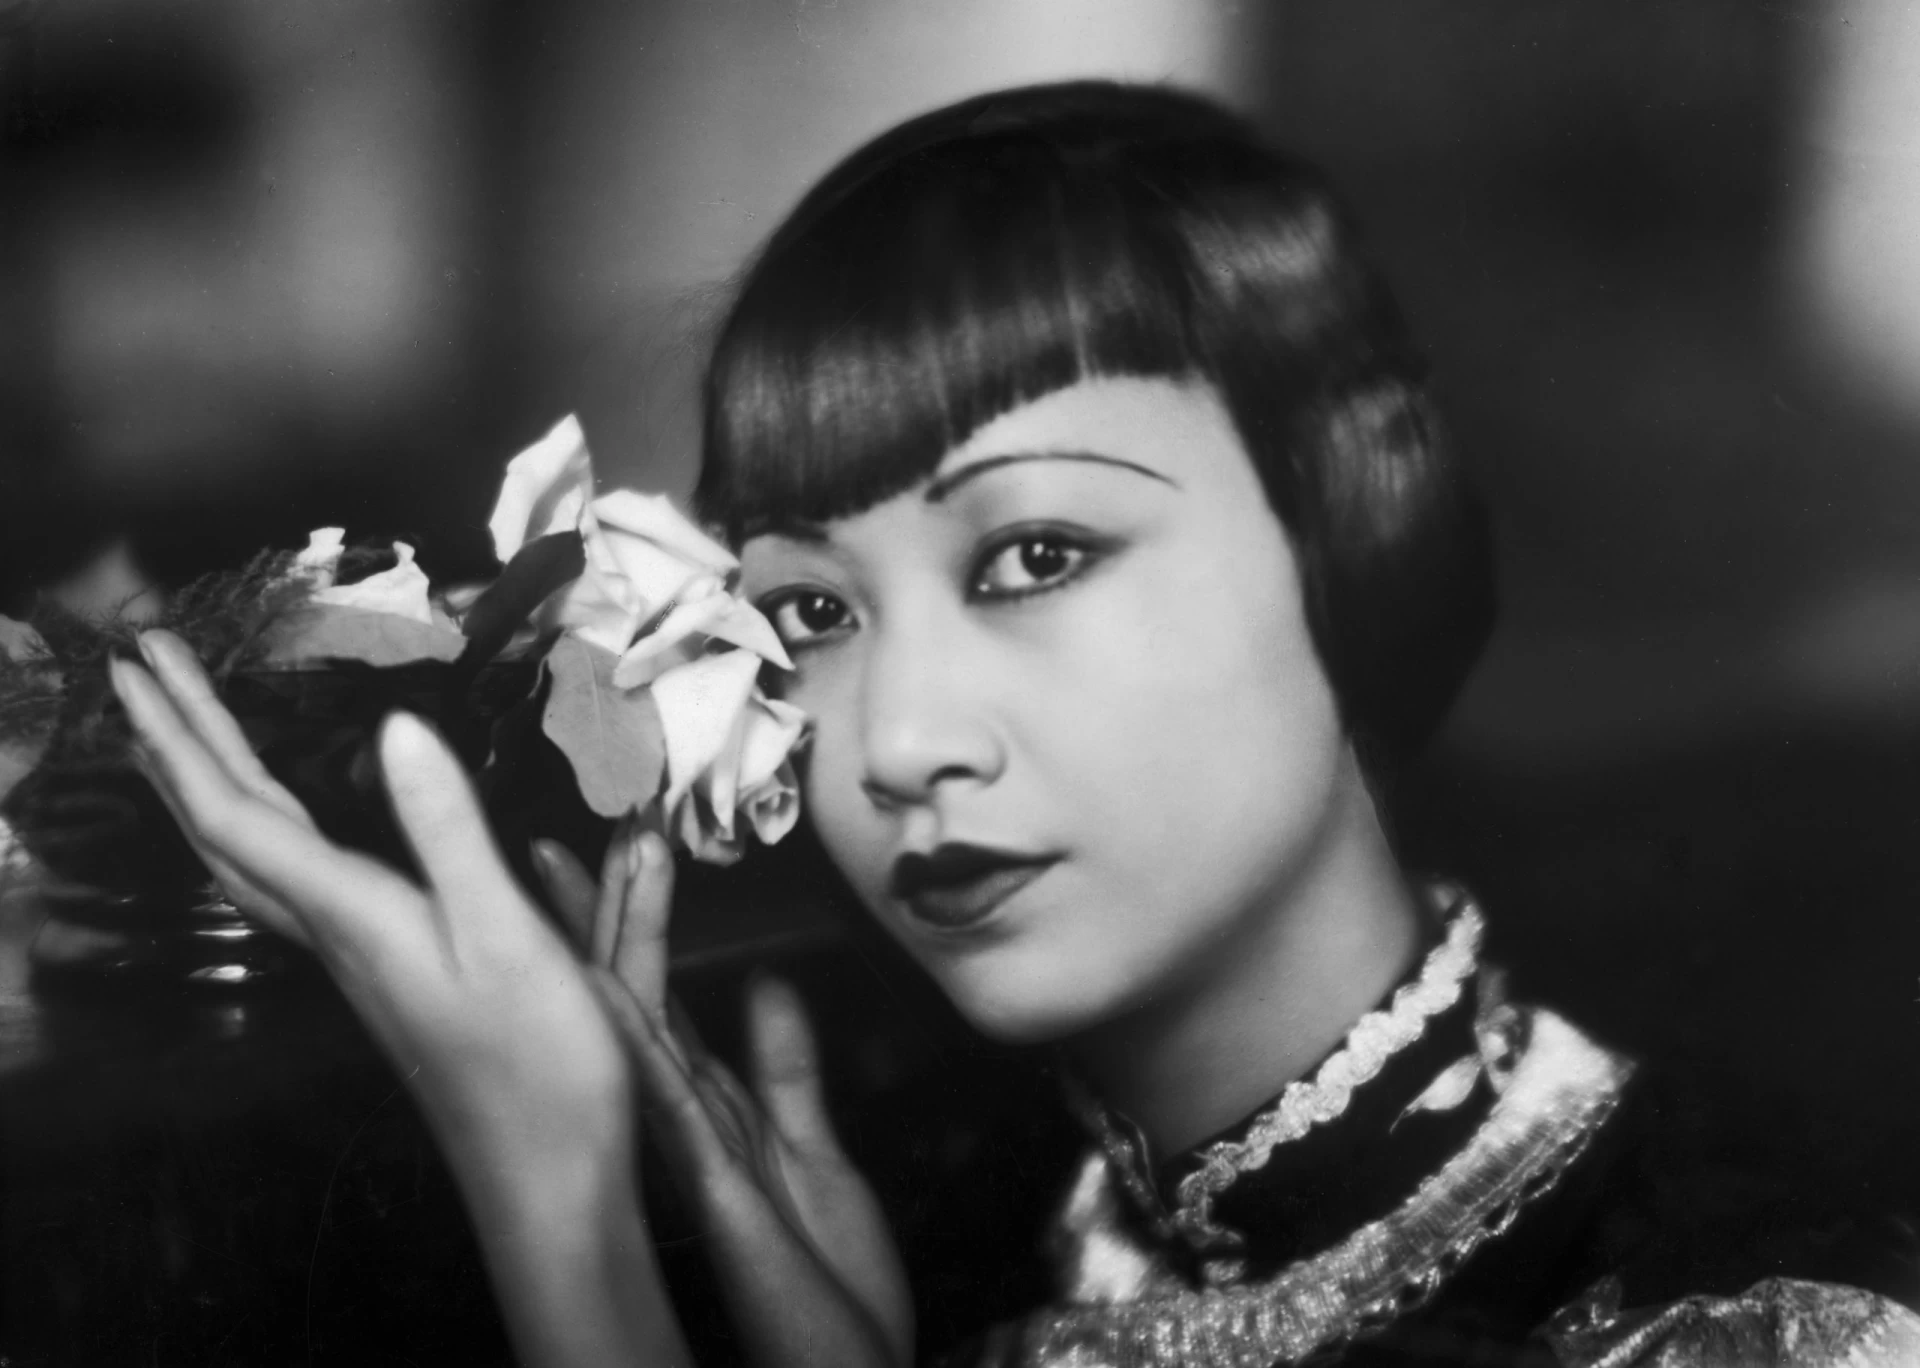 Anna May Wong is making a starring appearance on the American quarter. But she used to star in American films.